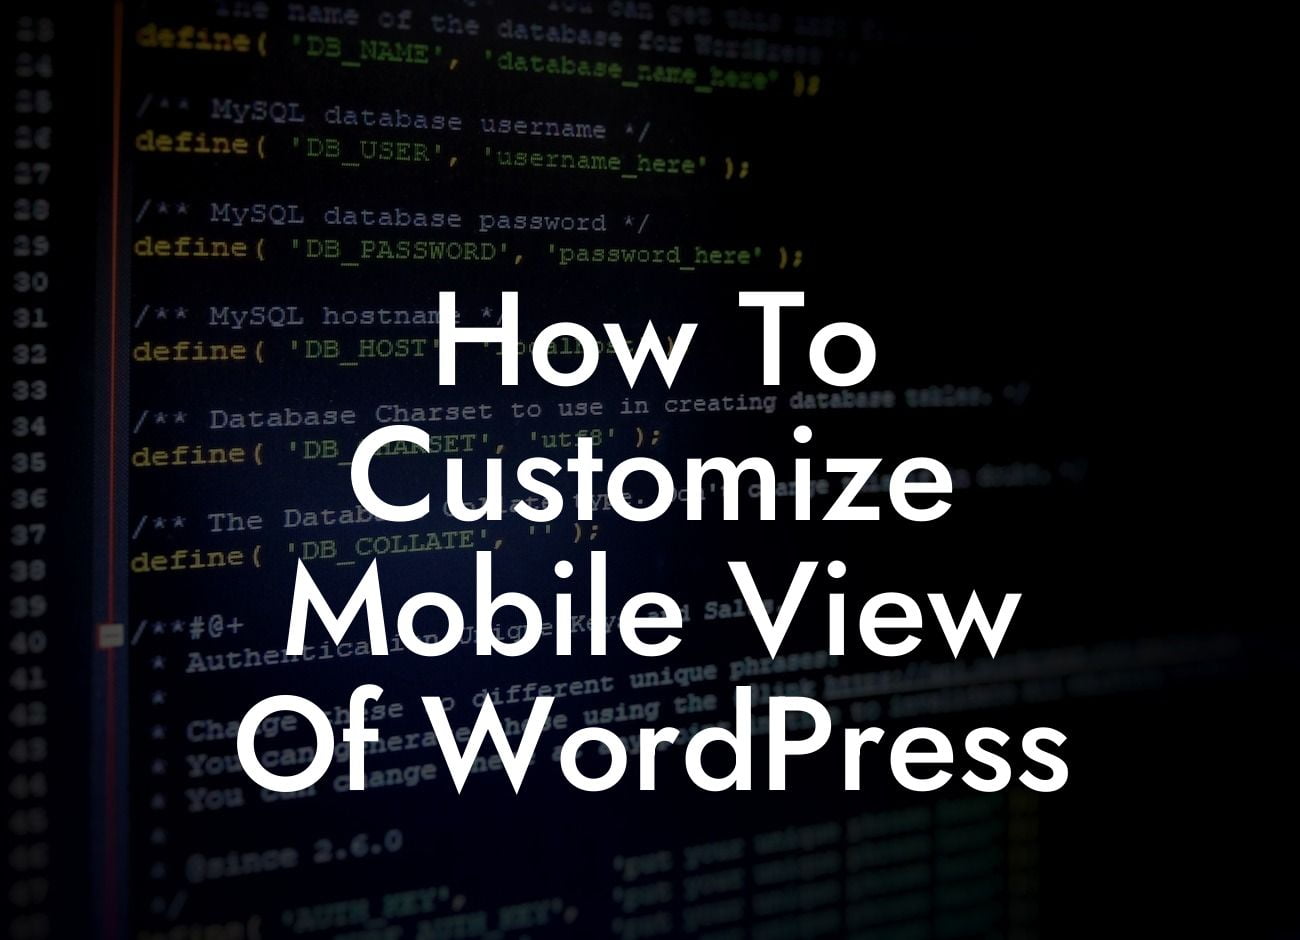 How To Customize Mobile View Of WordPress